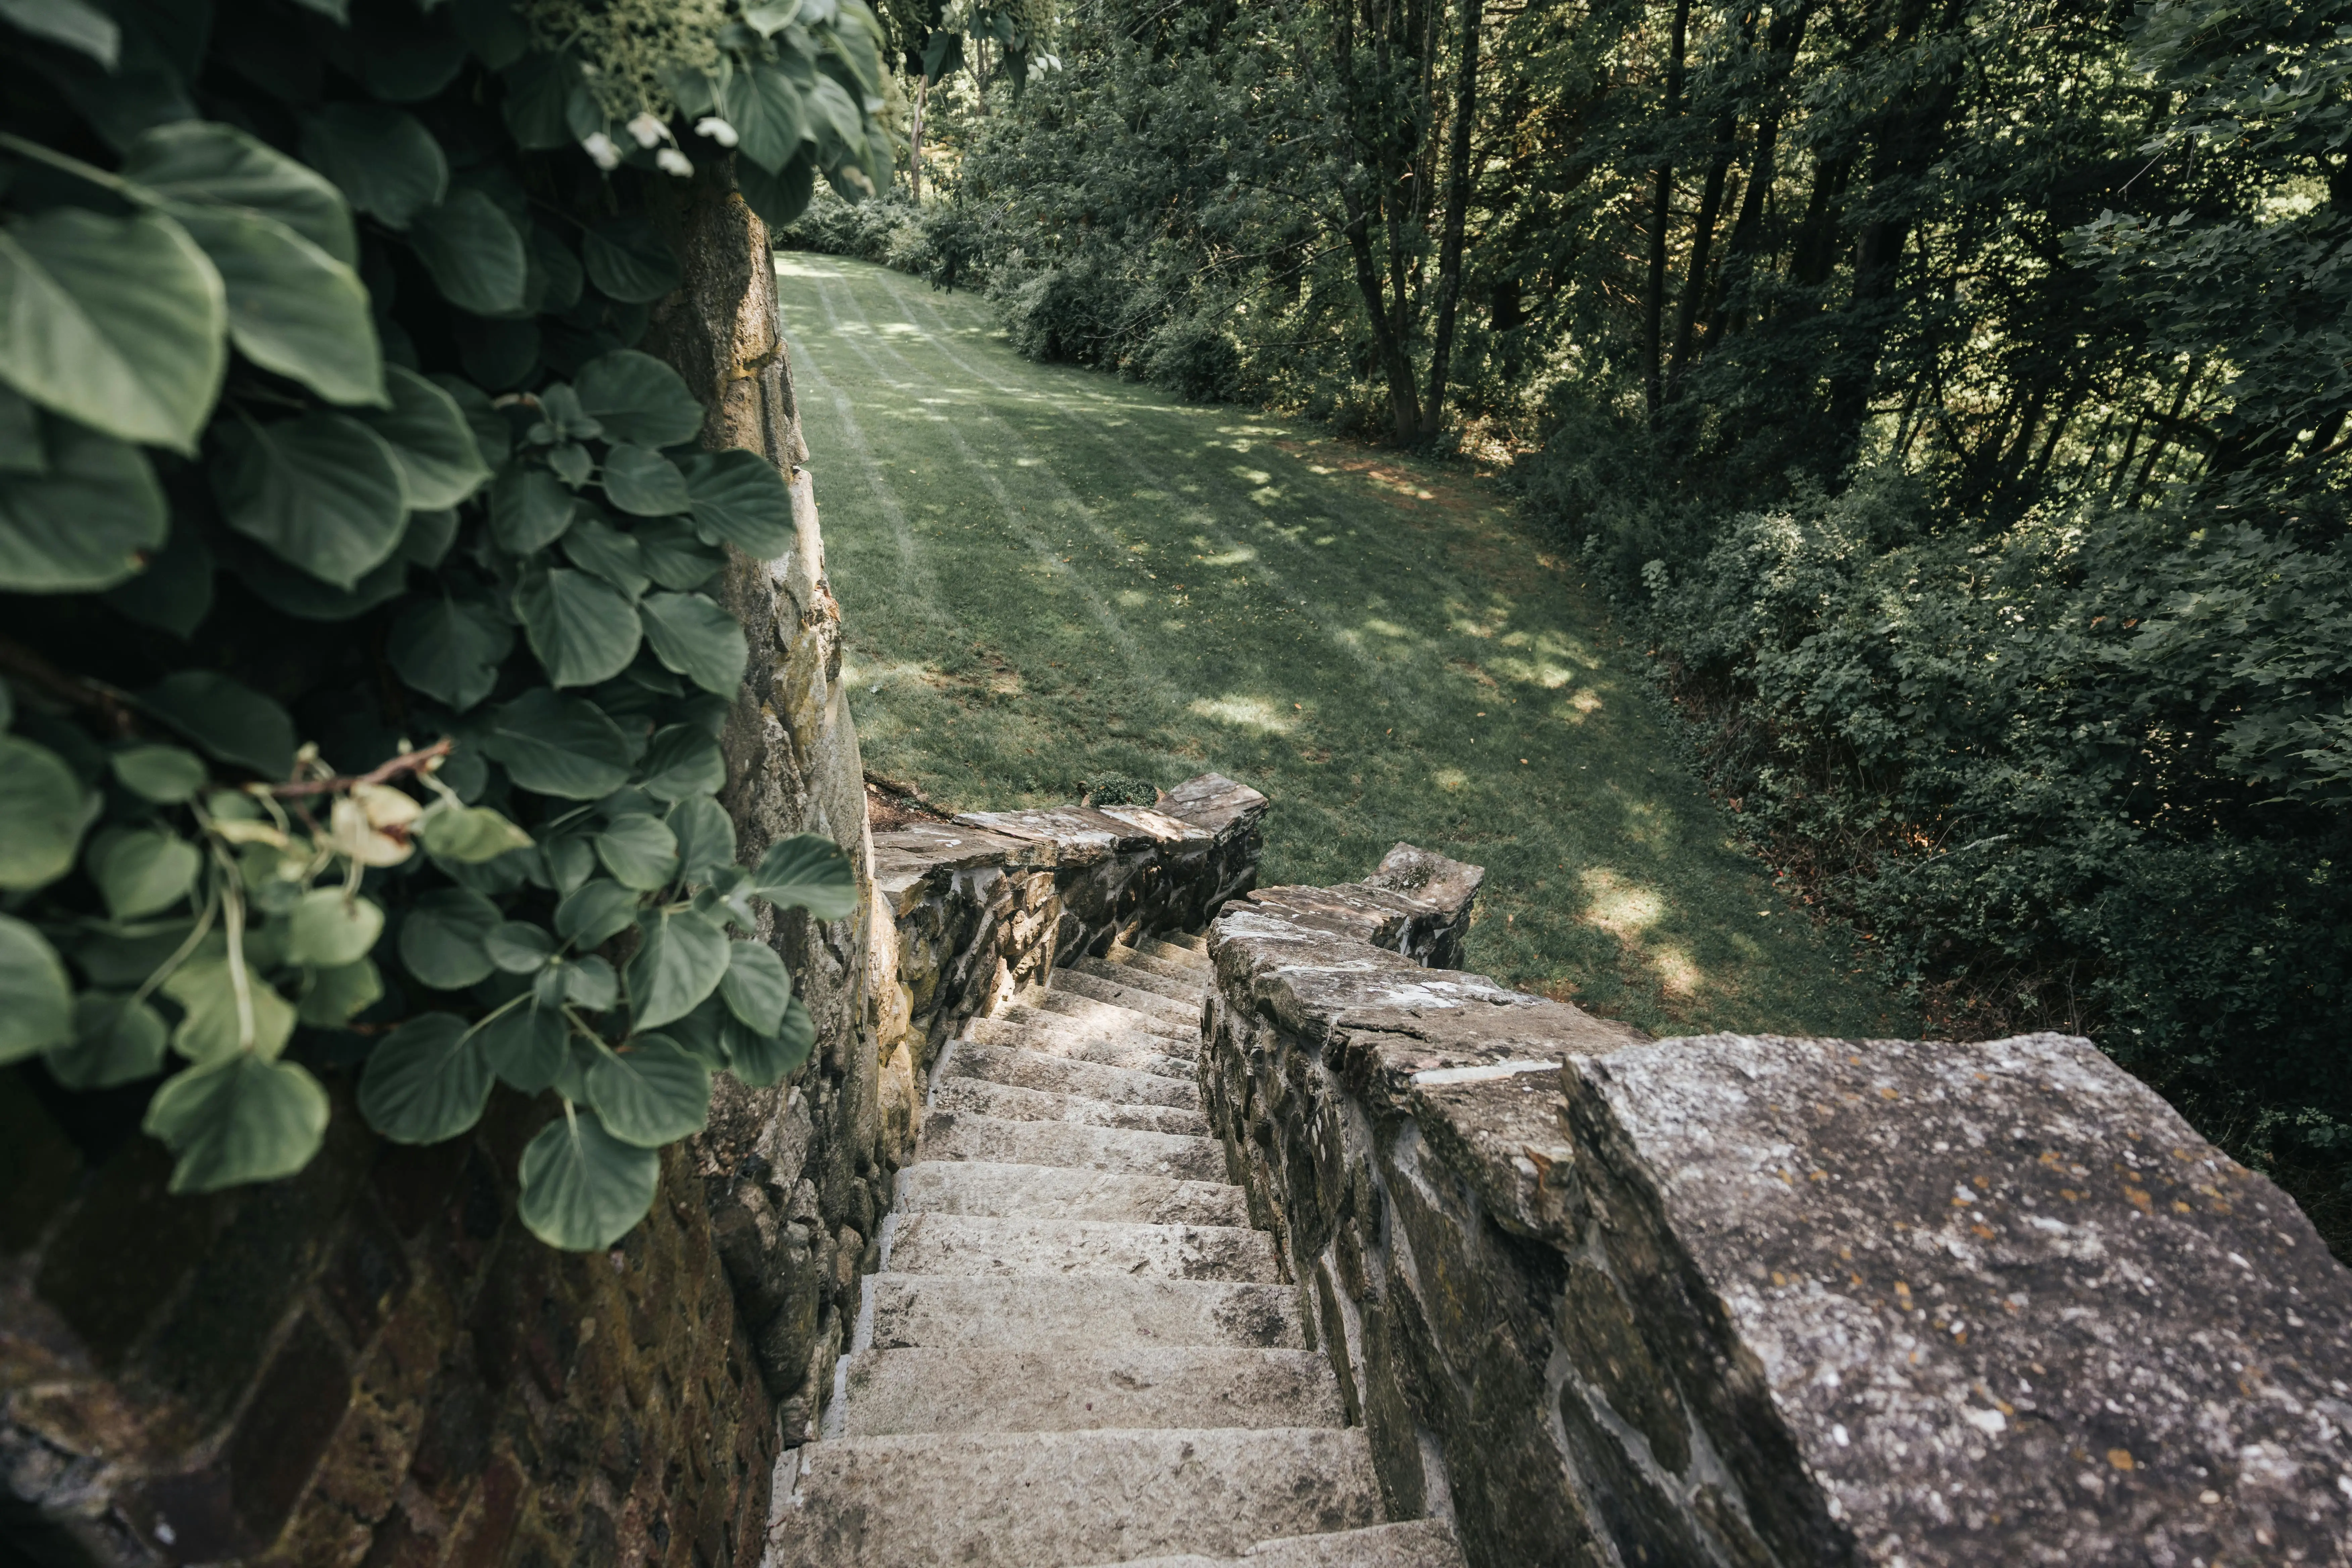 A garden with some stone steps